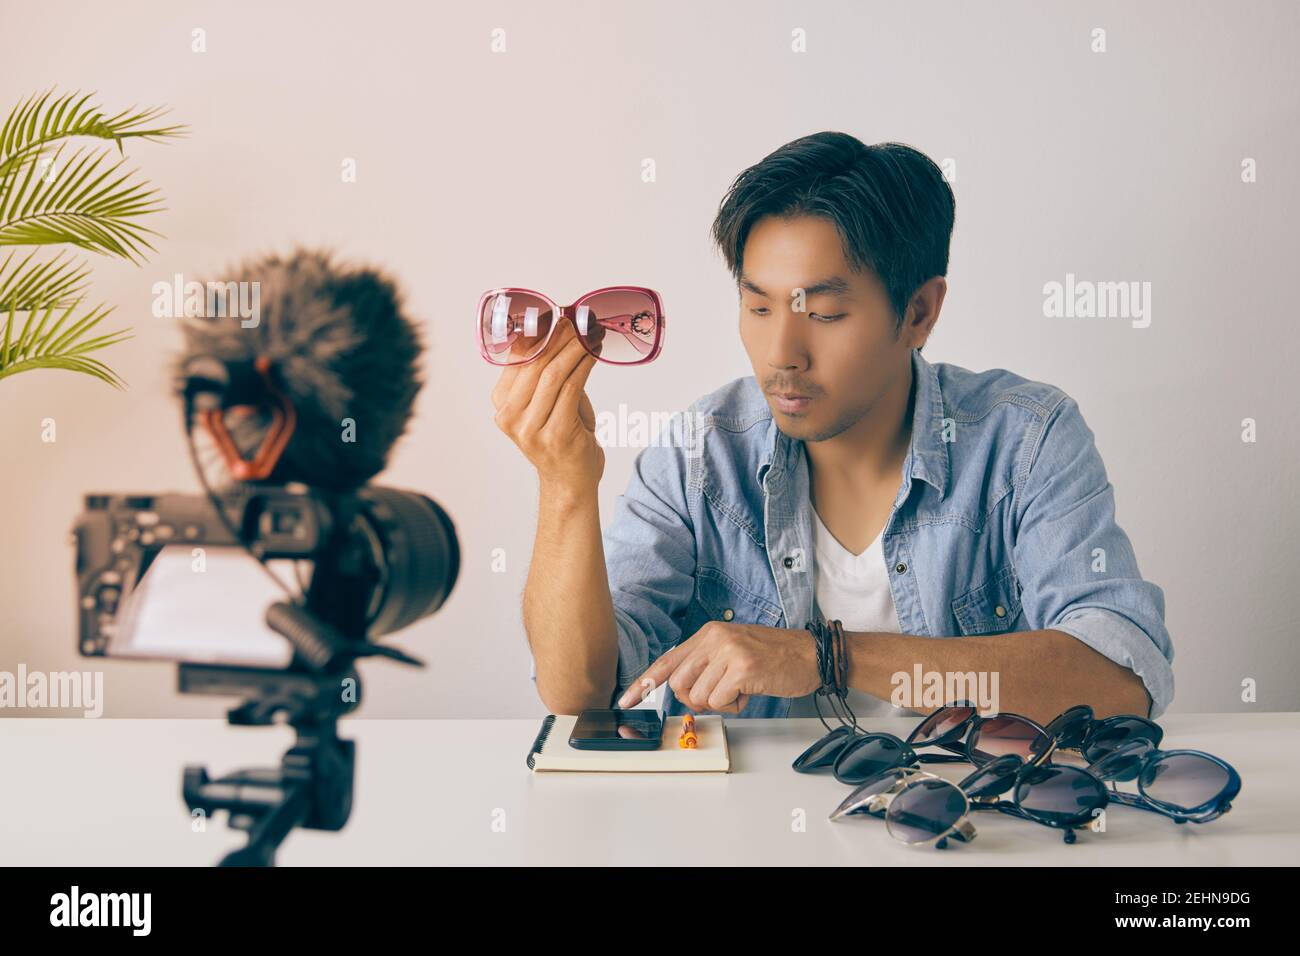 Asian Vlogger or Blogger Show Pink Fashion Glasses and Using Smartphone to Chat with Customer and Recording Video. Freelancer Online Live Streaming wi Stock Photo